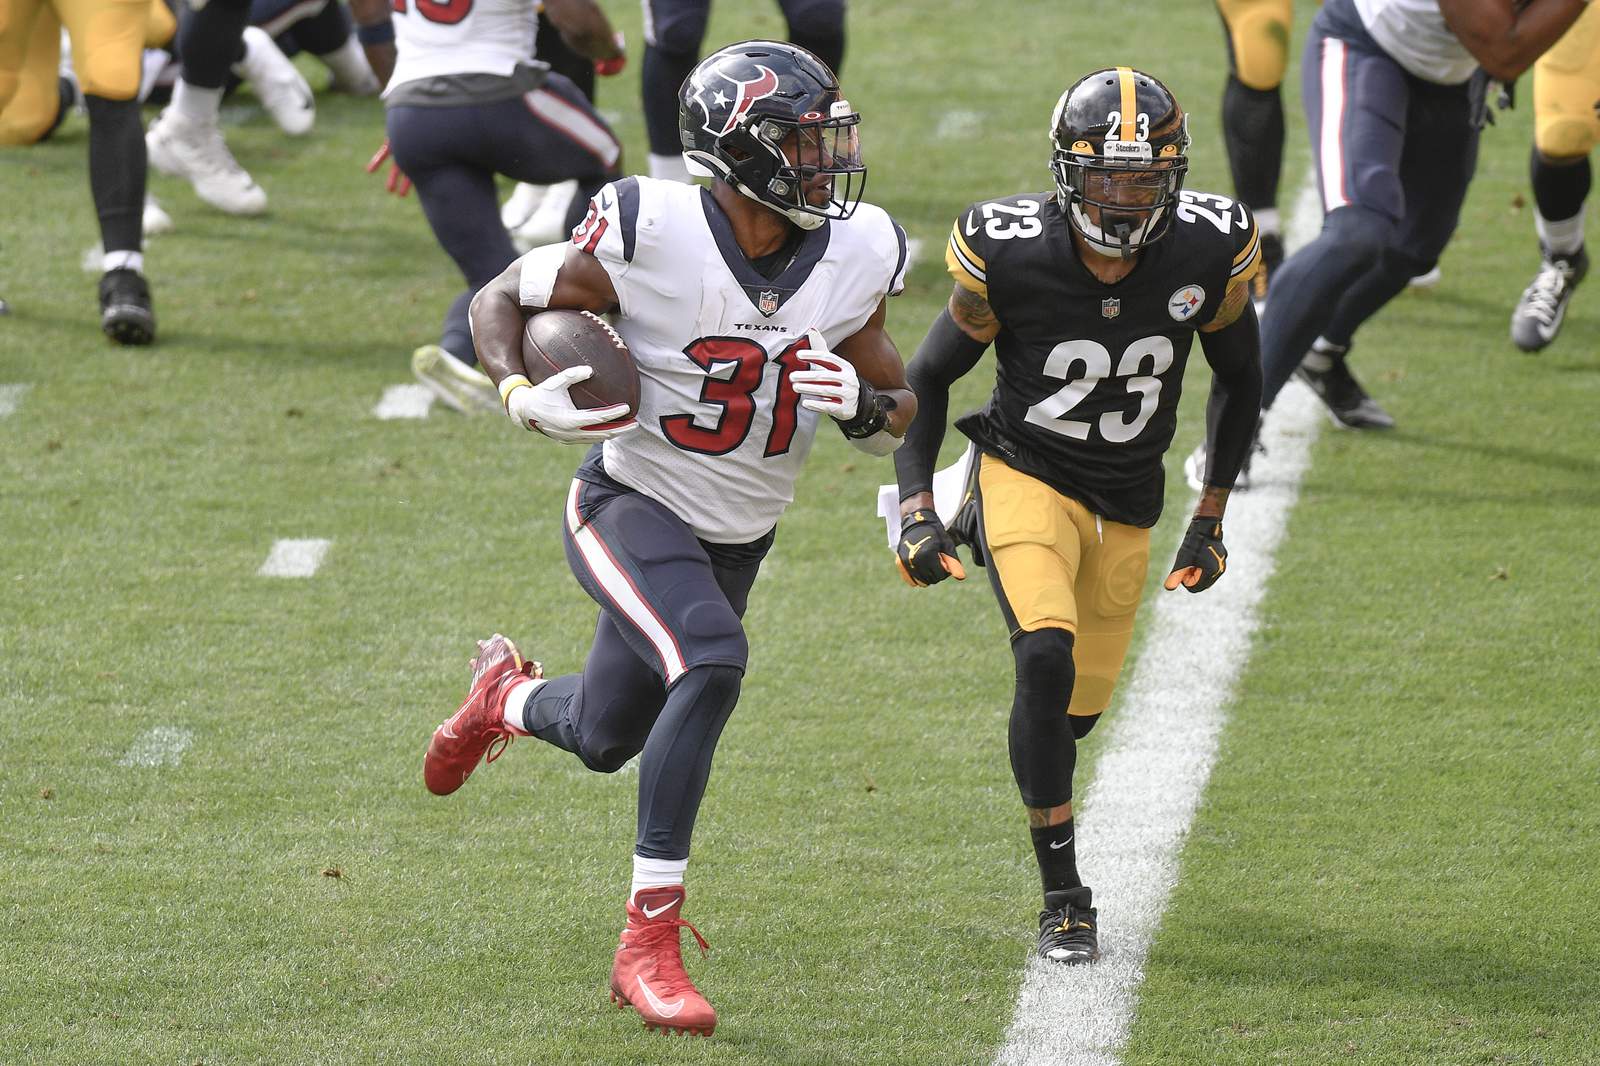 Texans place RB Johnson on reserve/COVID-19 list